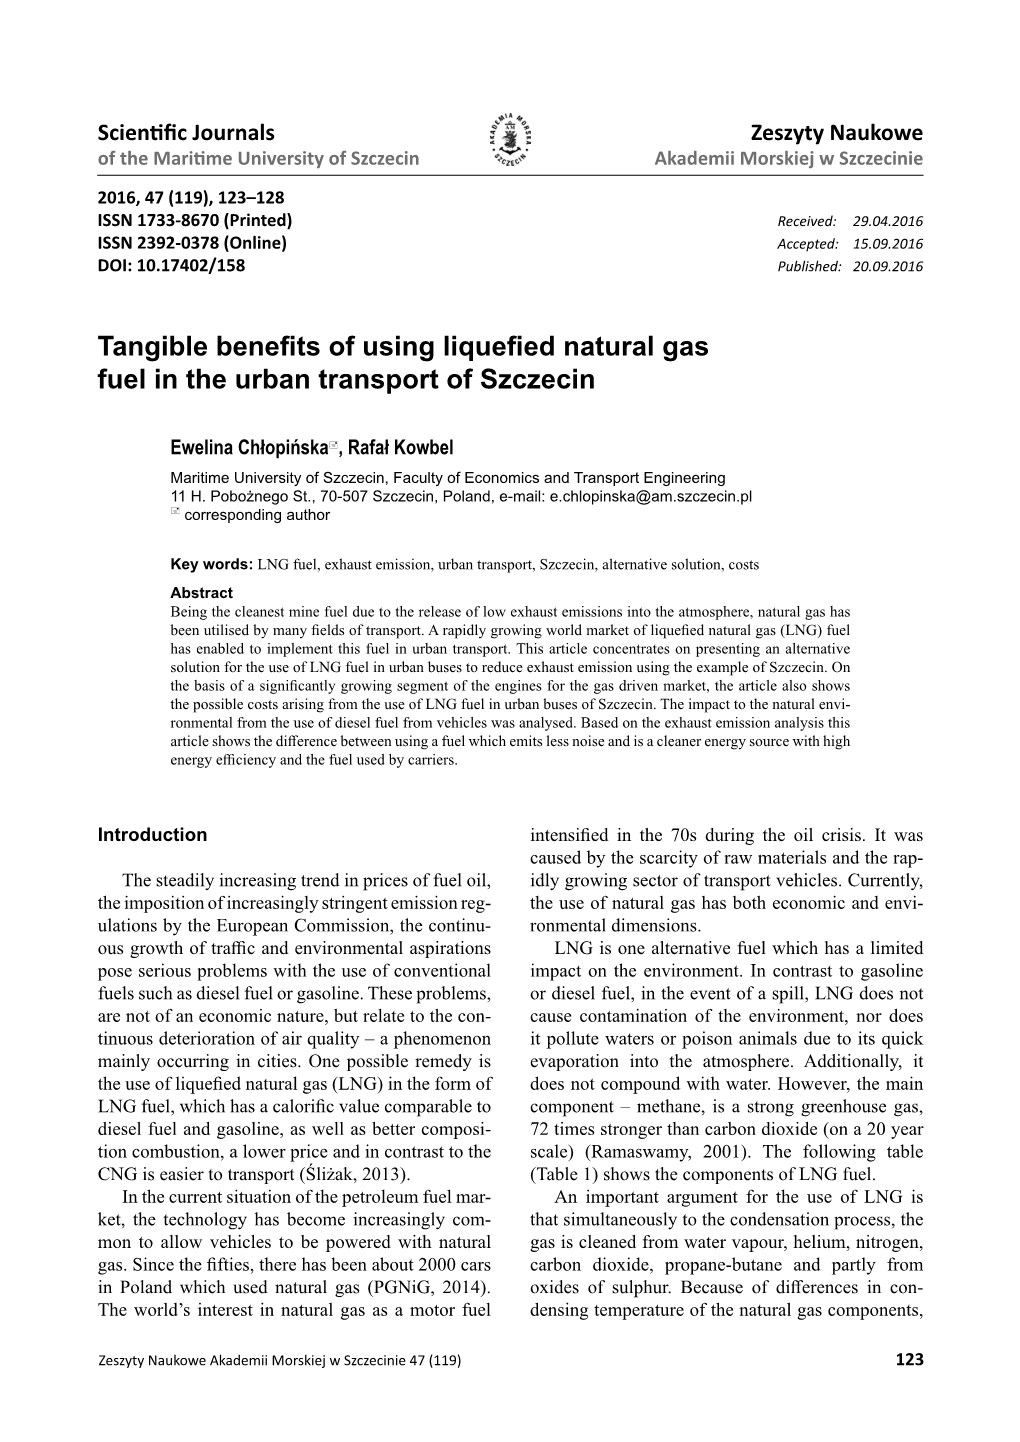 Tangible Benefits of Using Liquefied Natural Gas Fuel in the Urban Transport of Szczecin